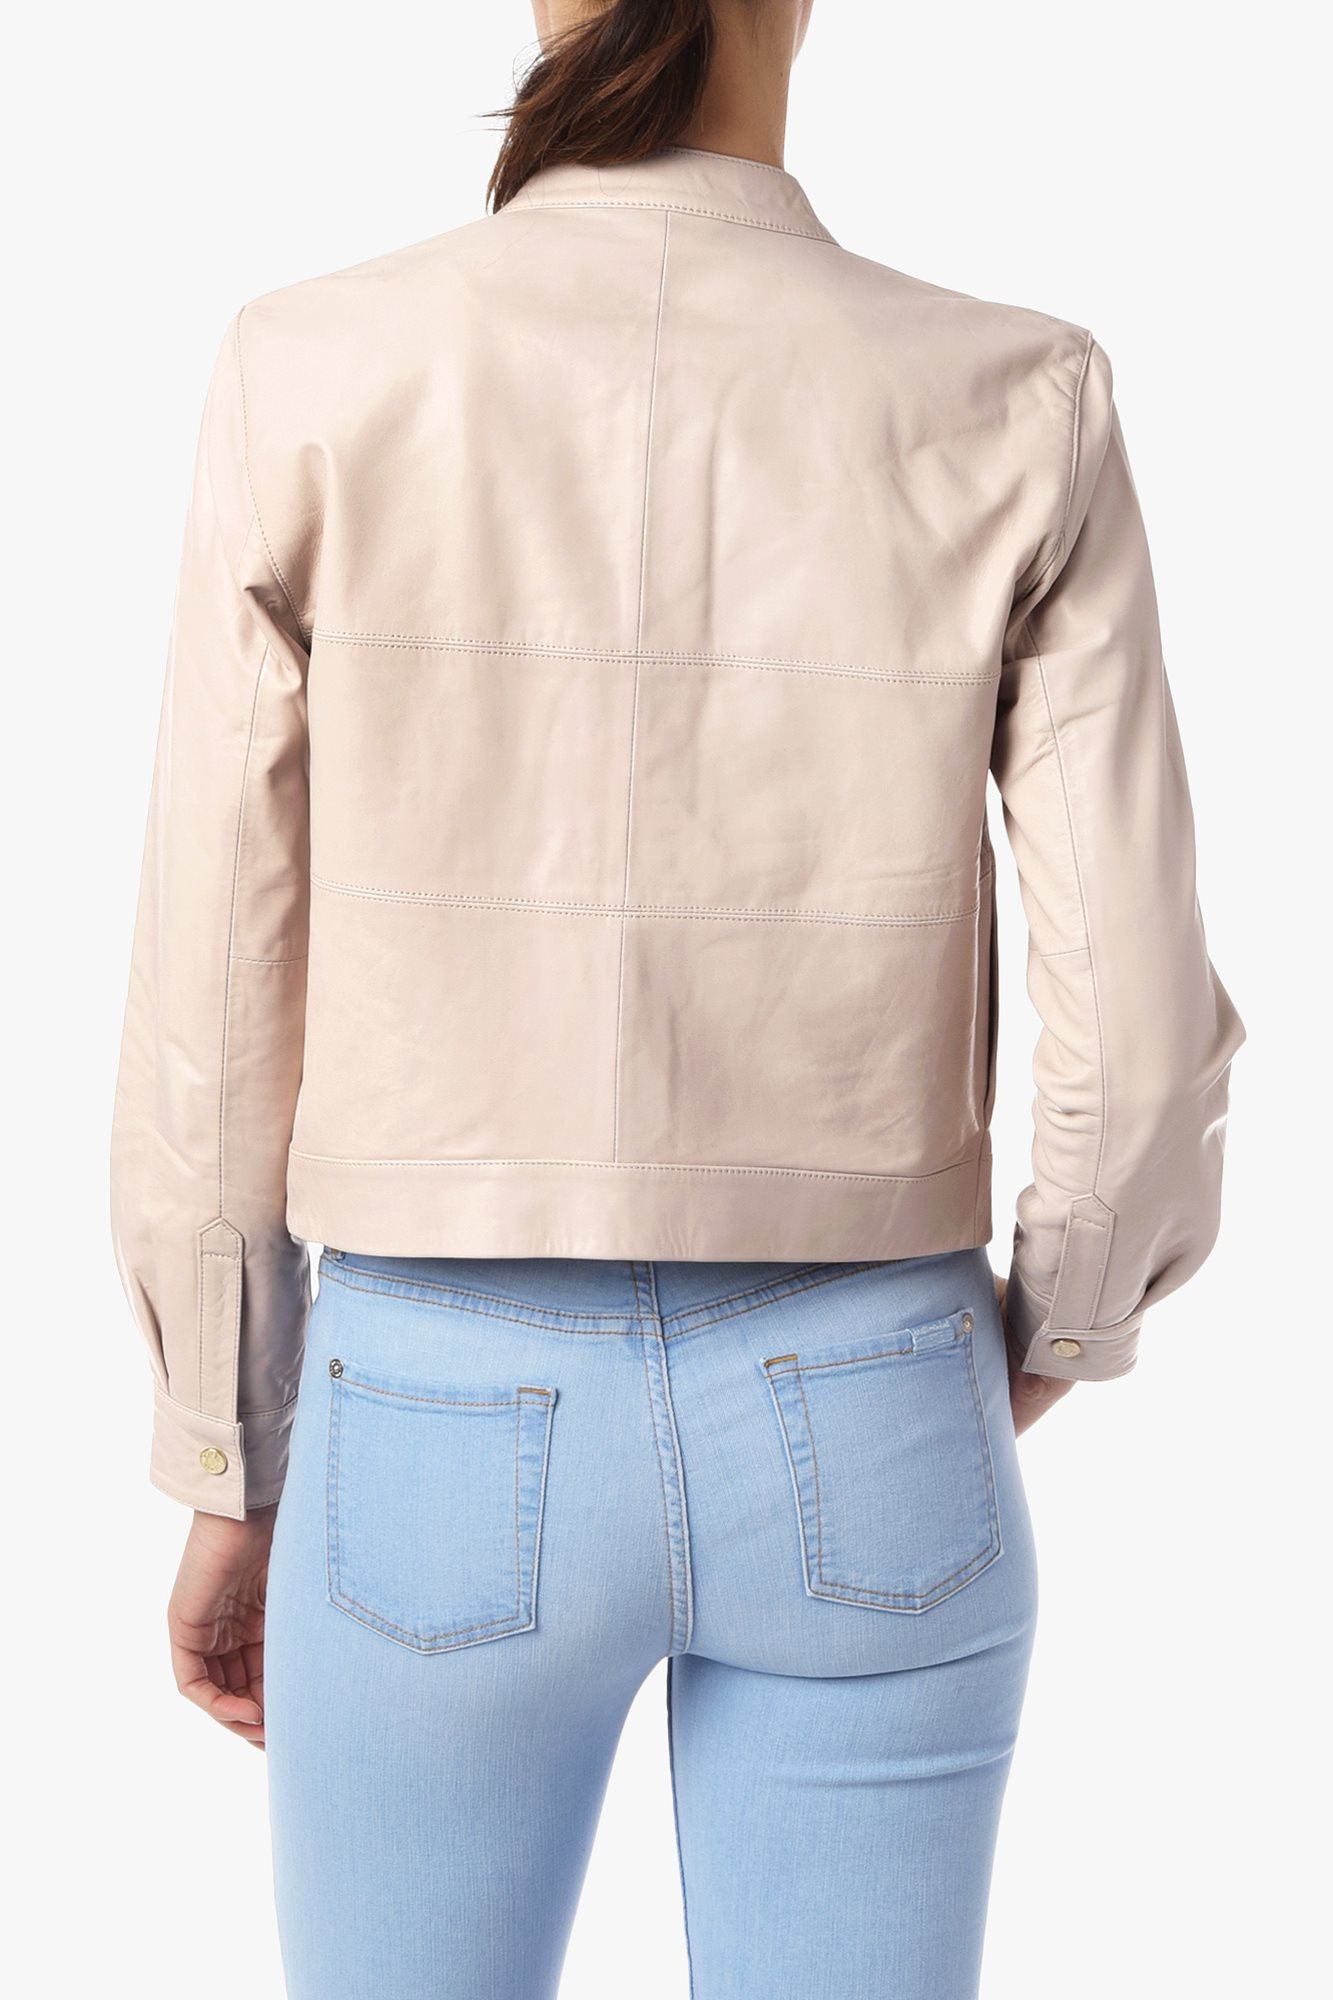 Lyst - 7 For All Mankind Leather Bomber Jacket With Snaps in Natural